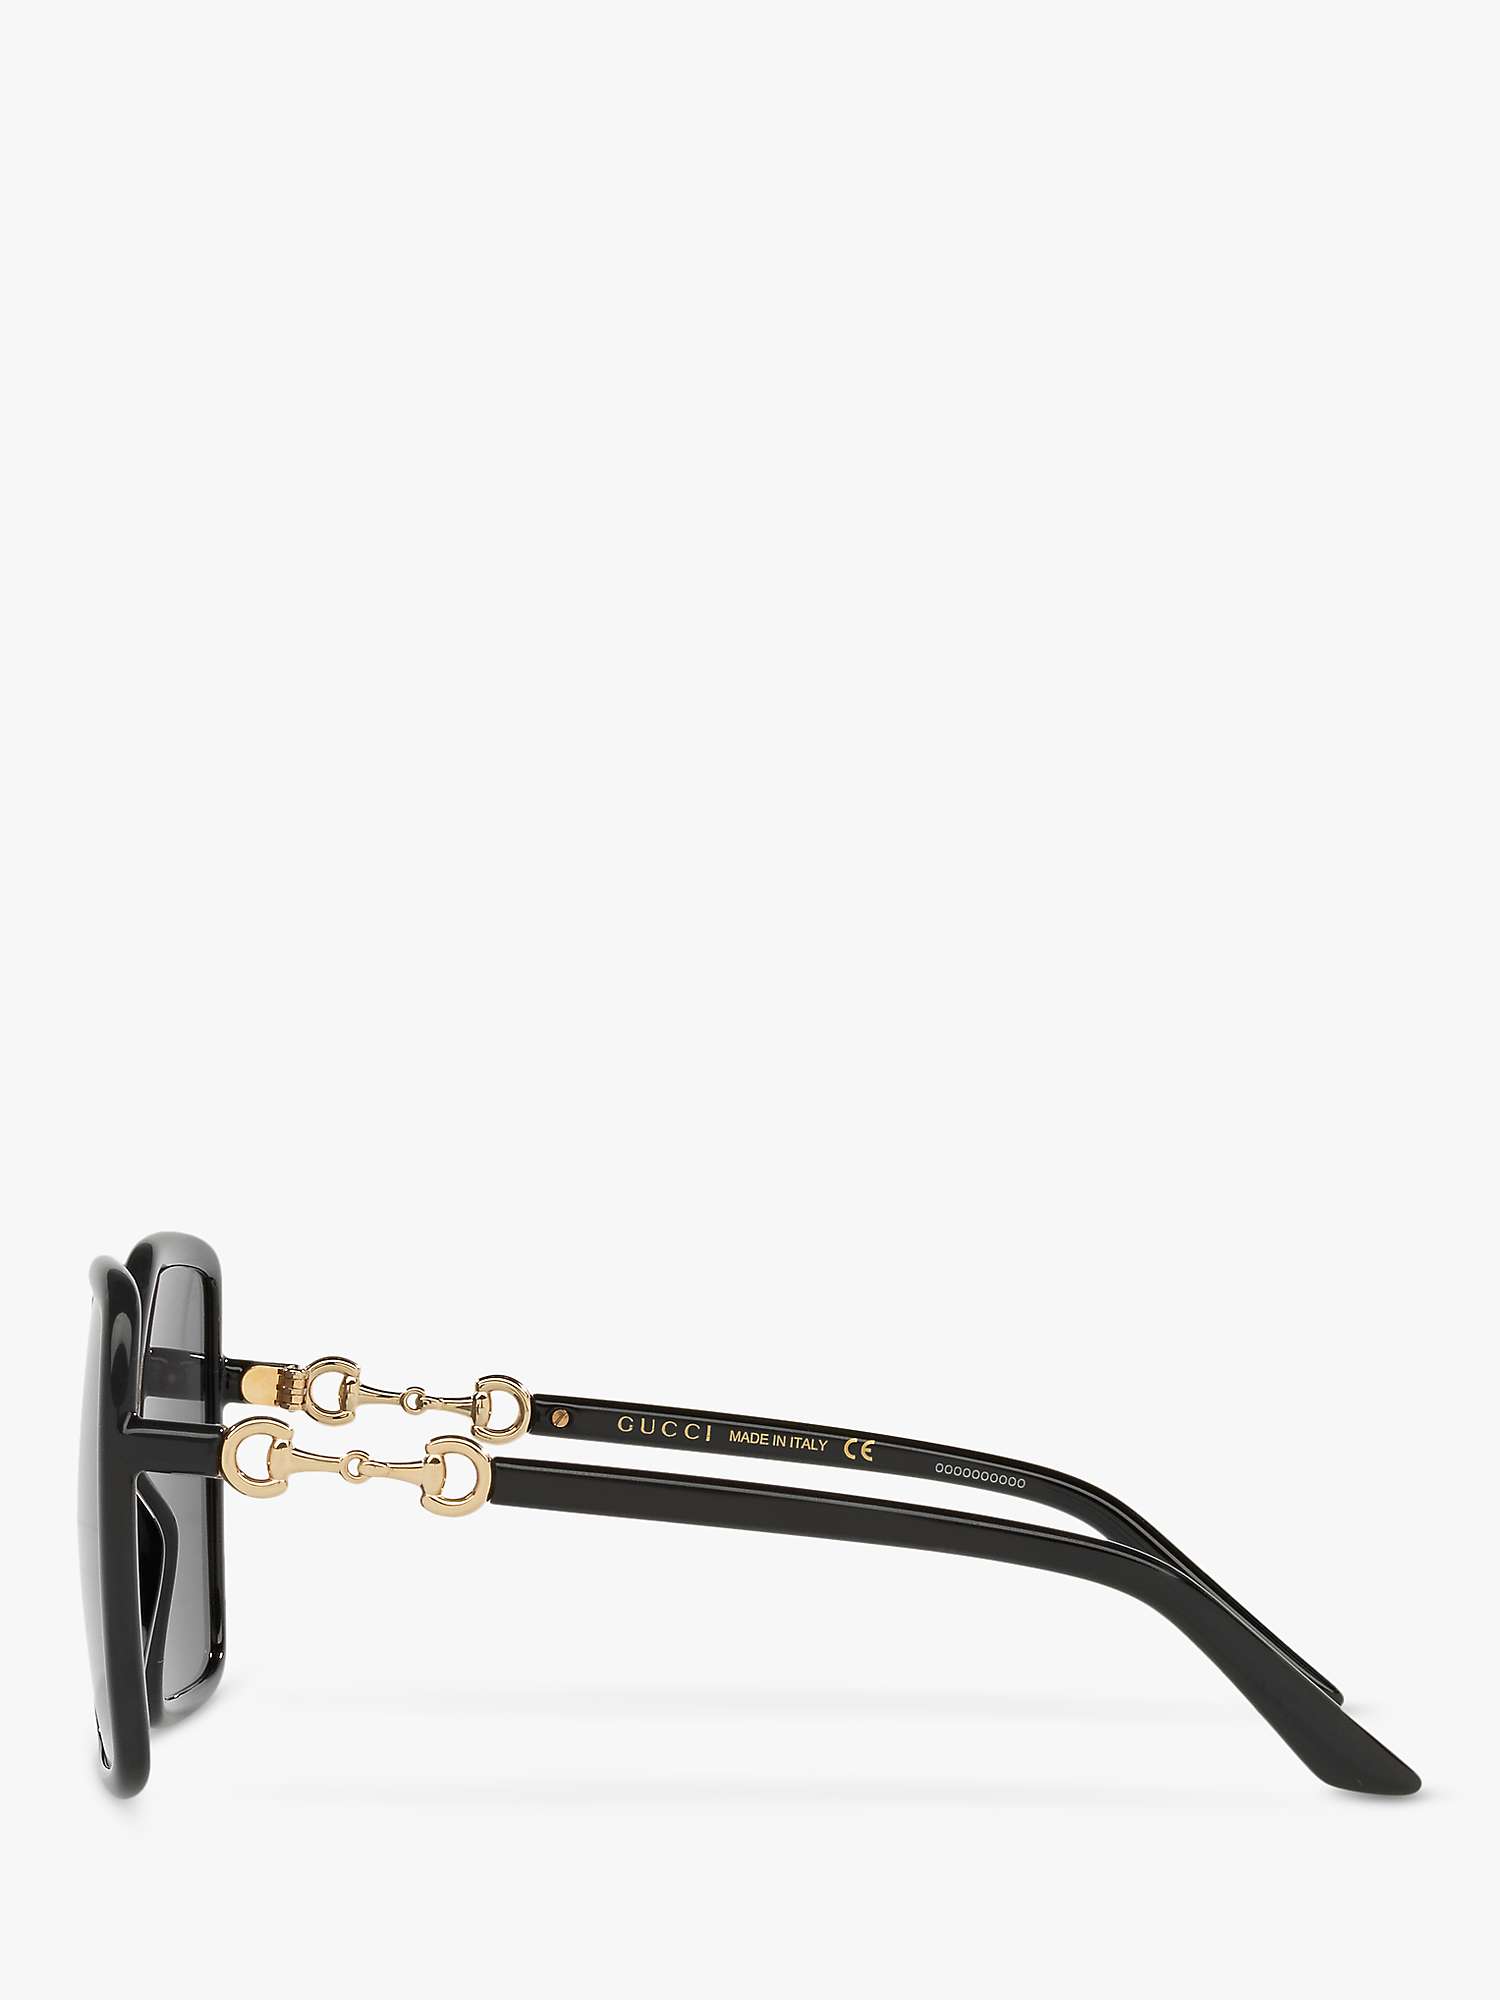 Buy Gucci GG0890S Women's Square Sunglasses Online at johnlewis.com